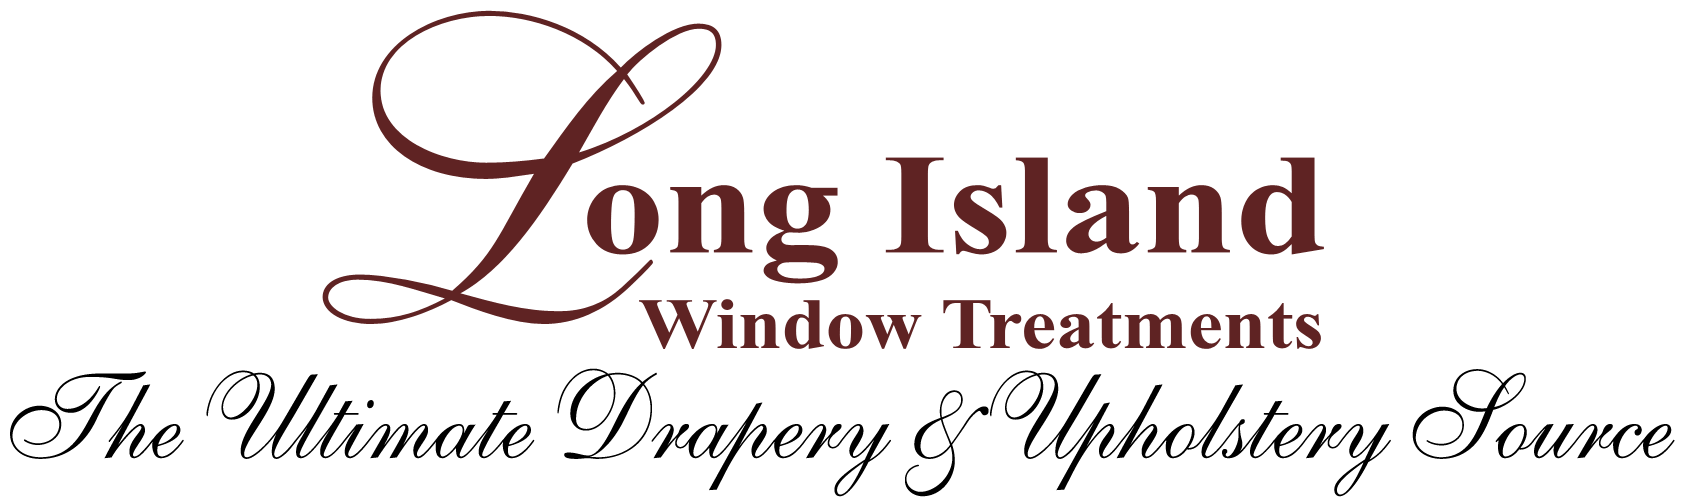 Long Island Window Treatments – Offering the Best Long Island Blinds, Draperies, Upholstery Work and More!